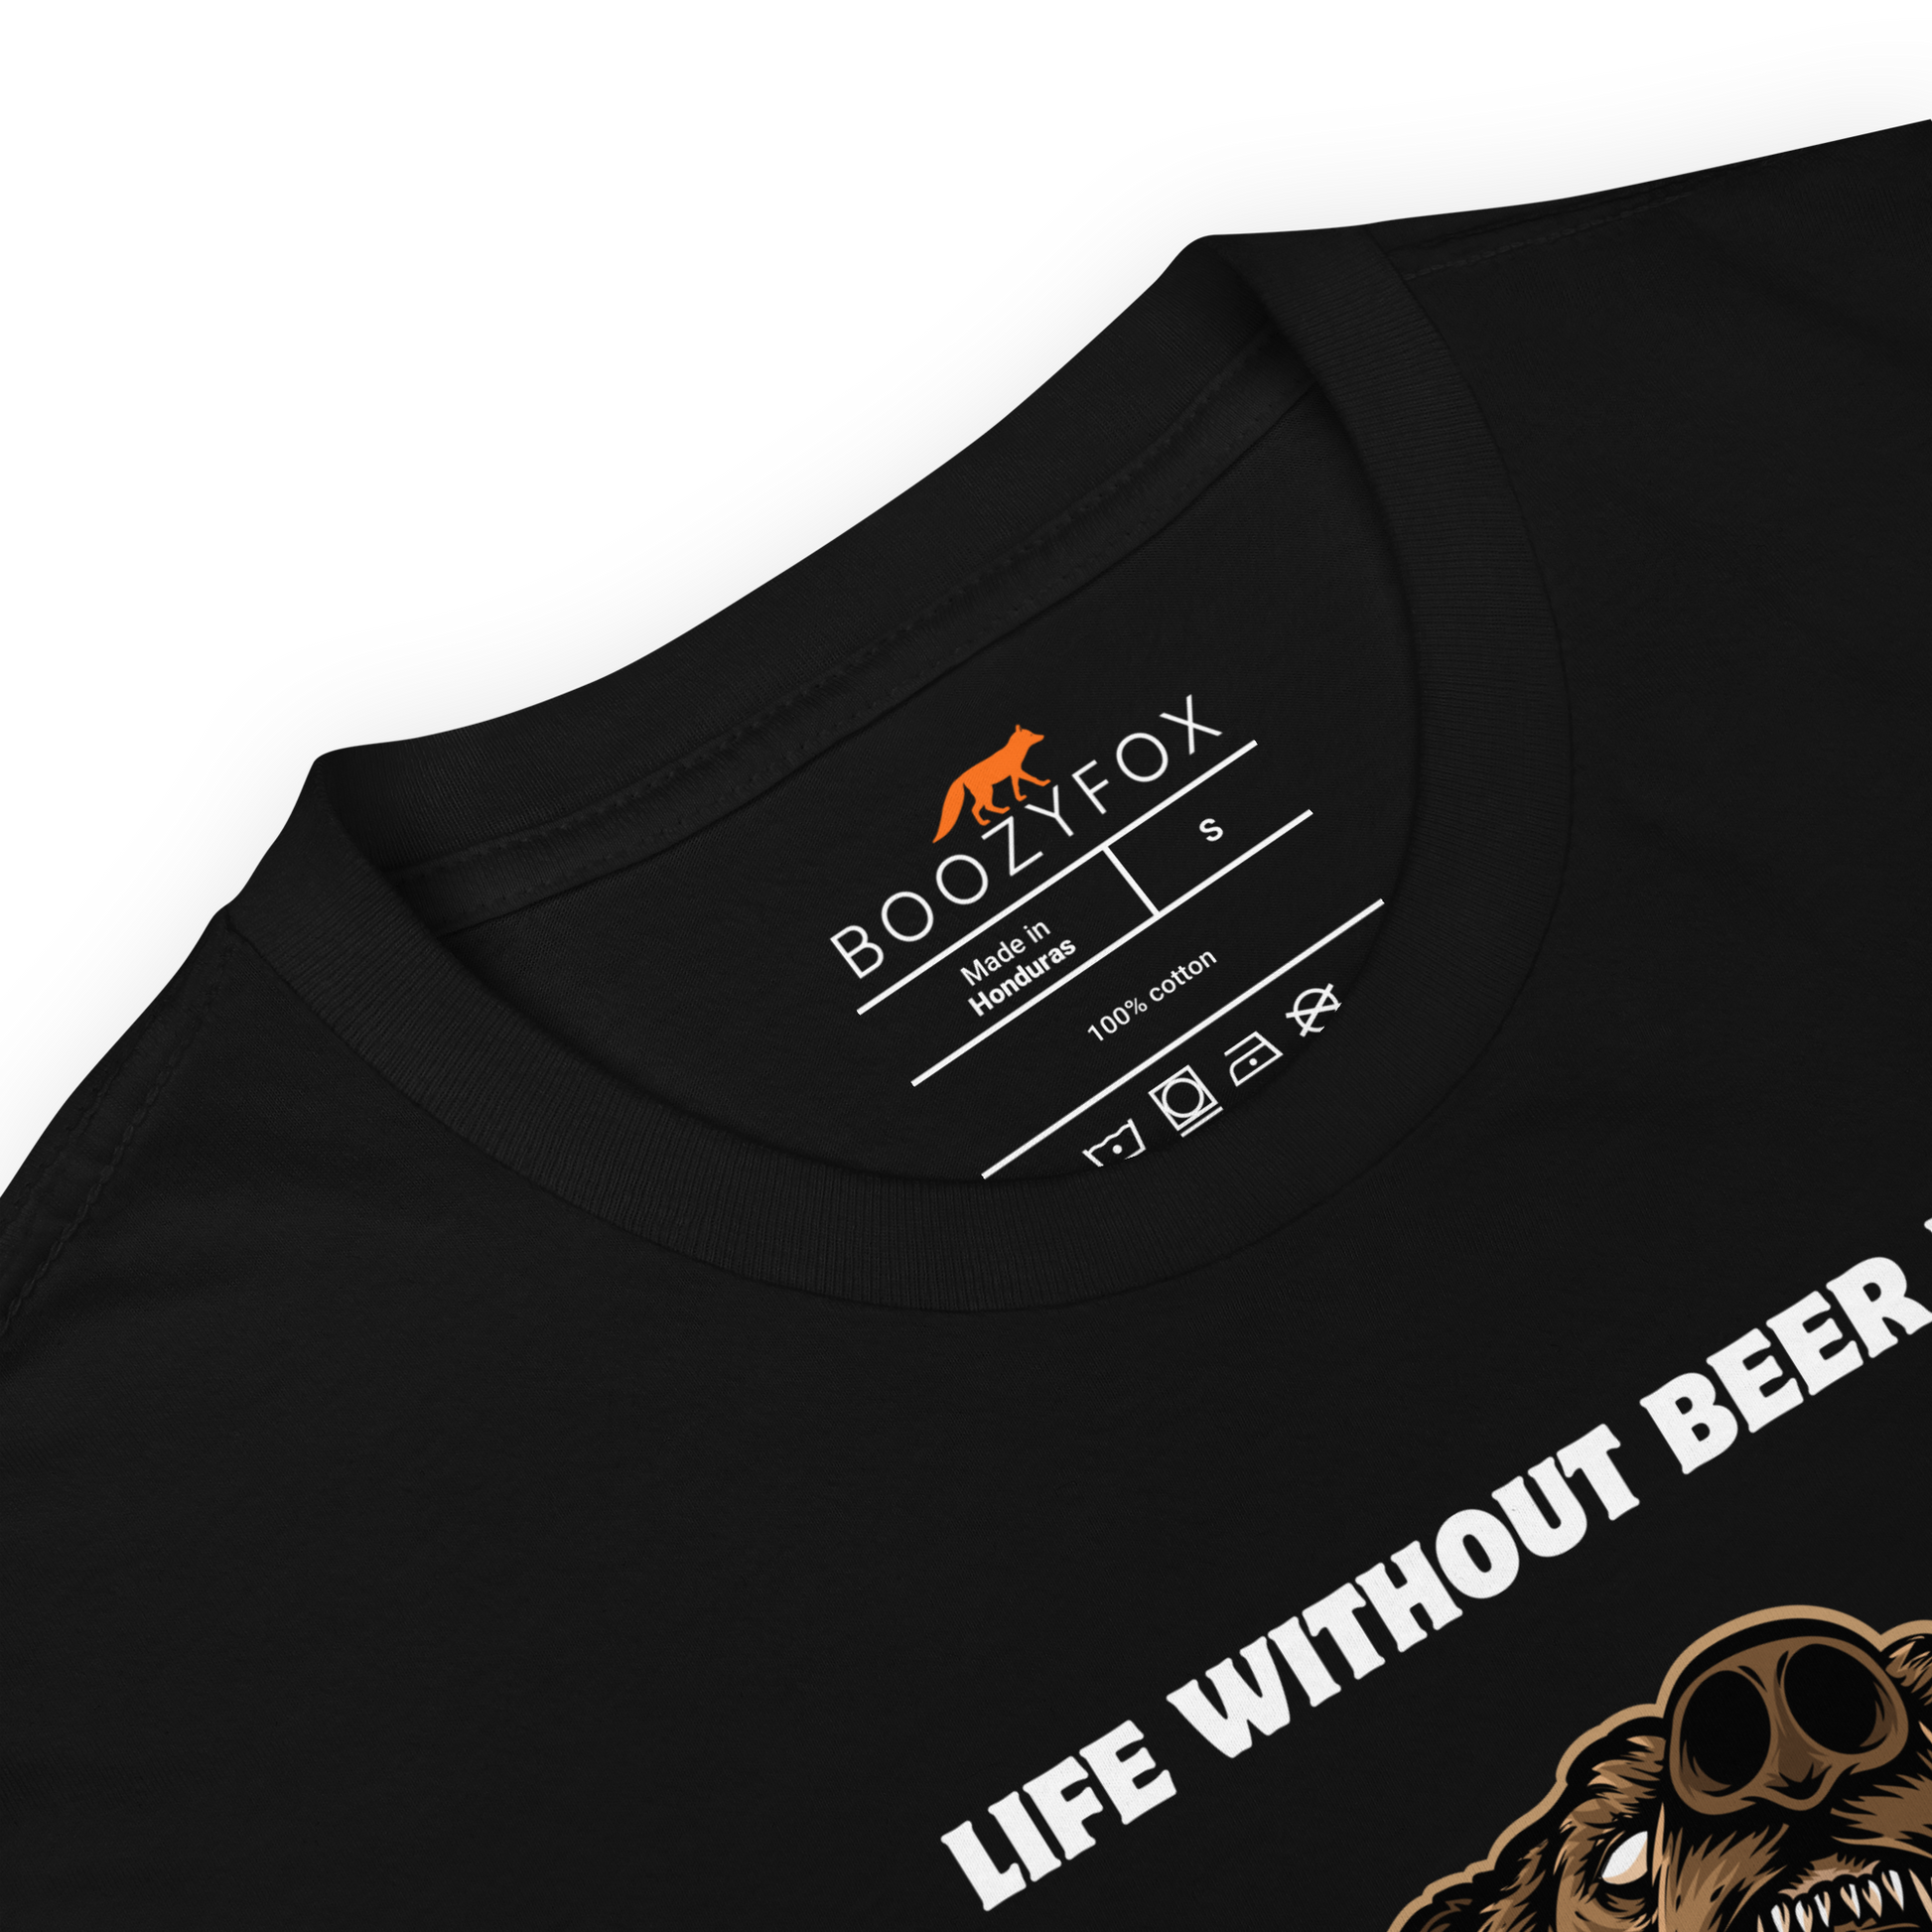 Product details of a Black Bear T-Shirt featuring a Life Without Beer Is Unbeerable graphic on the chest - Funny Graphic Bear T-Shirts - Boozy Fox